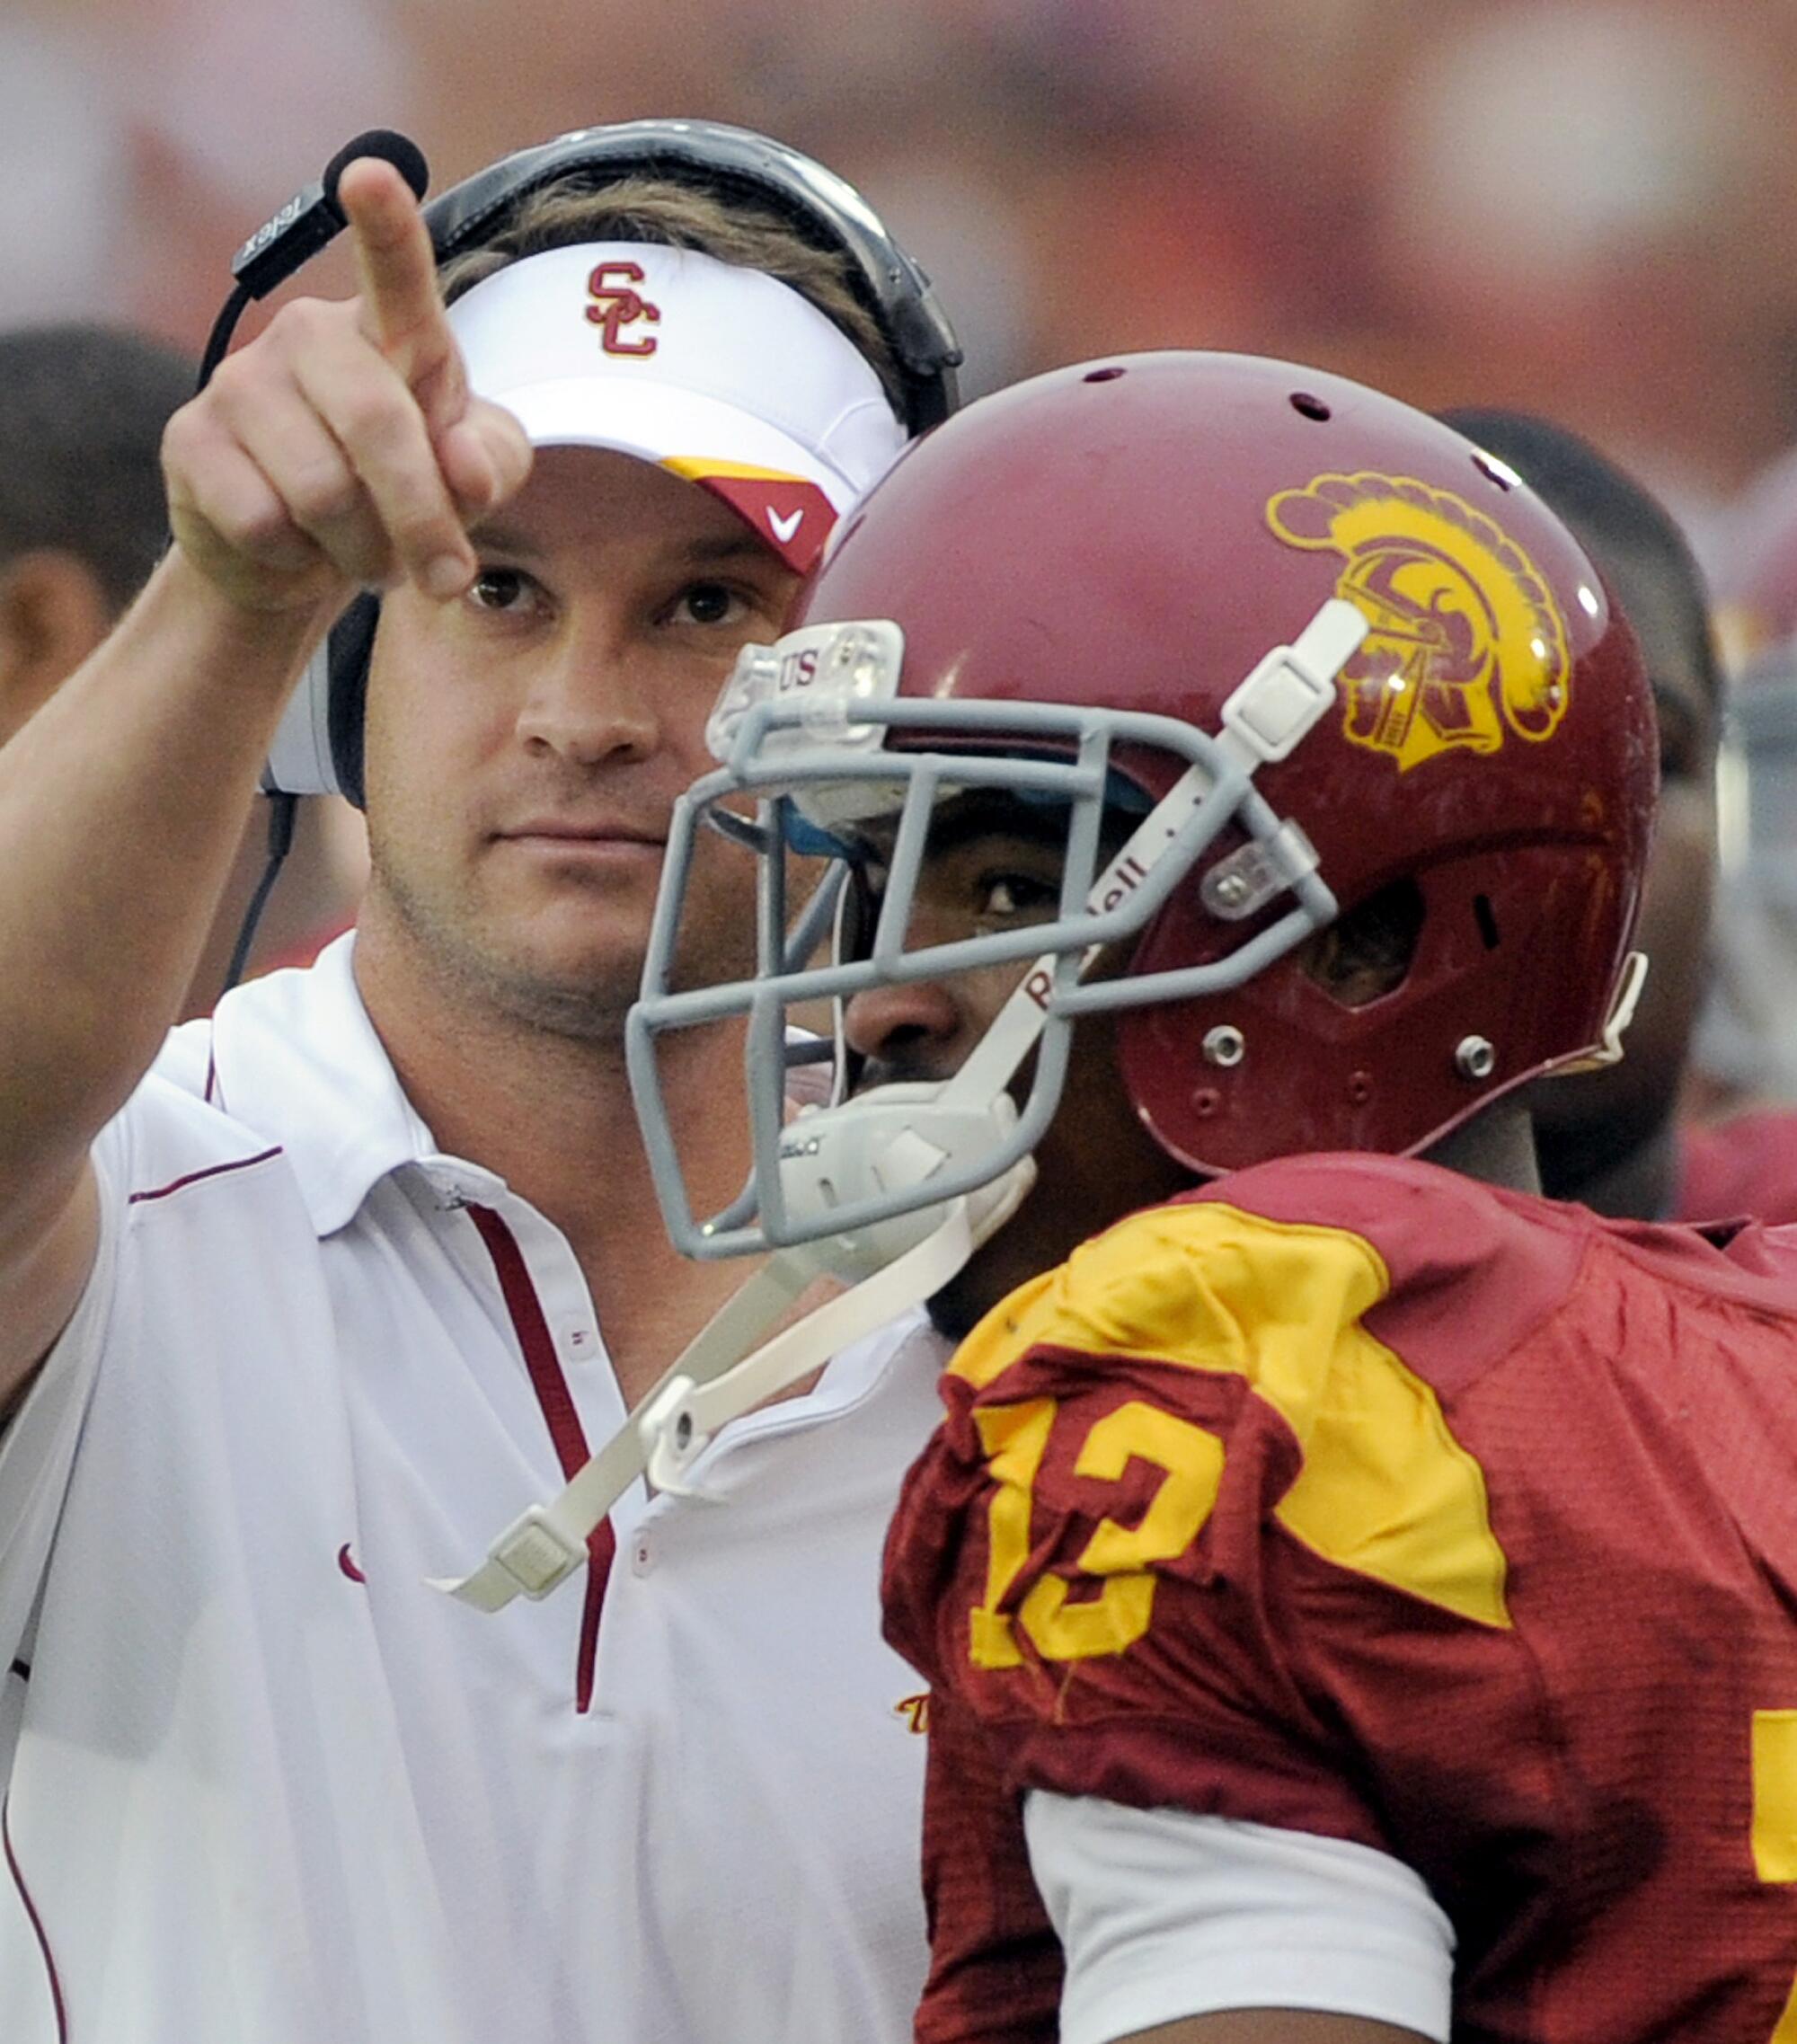 USC wide receiver Robert Woods watches a replay of his second touchdown with coach Lane Kiffin.